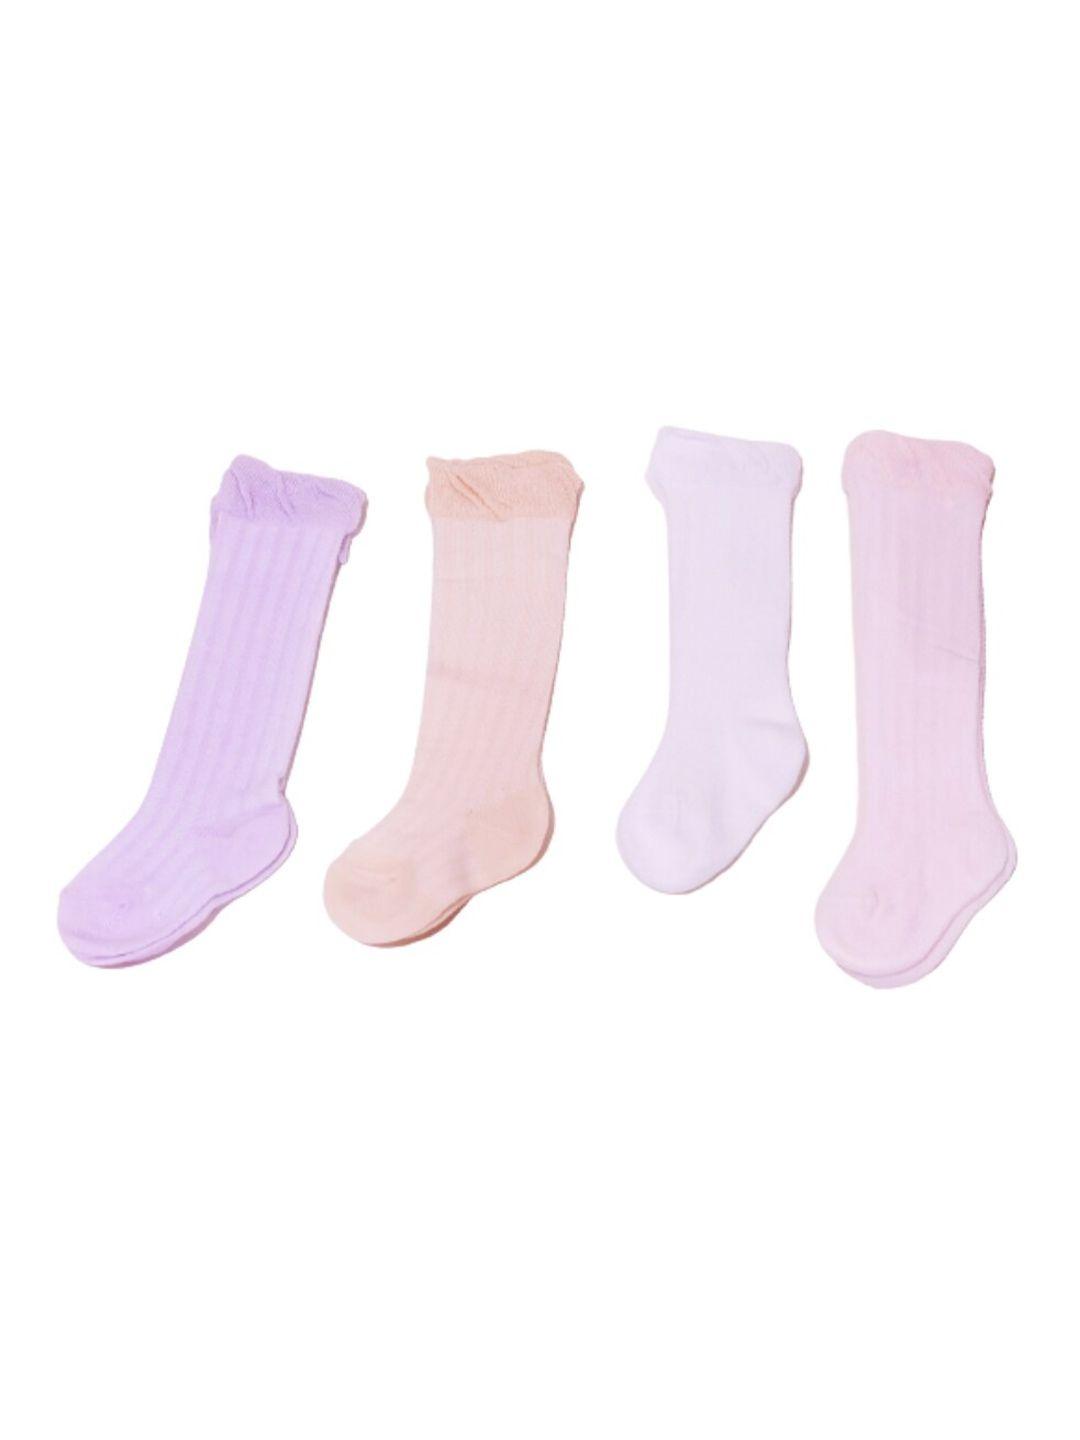 tipy tipy tap pack of 4 infants cotton knee length socks